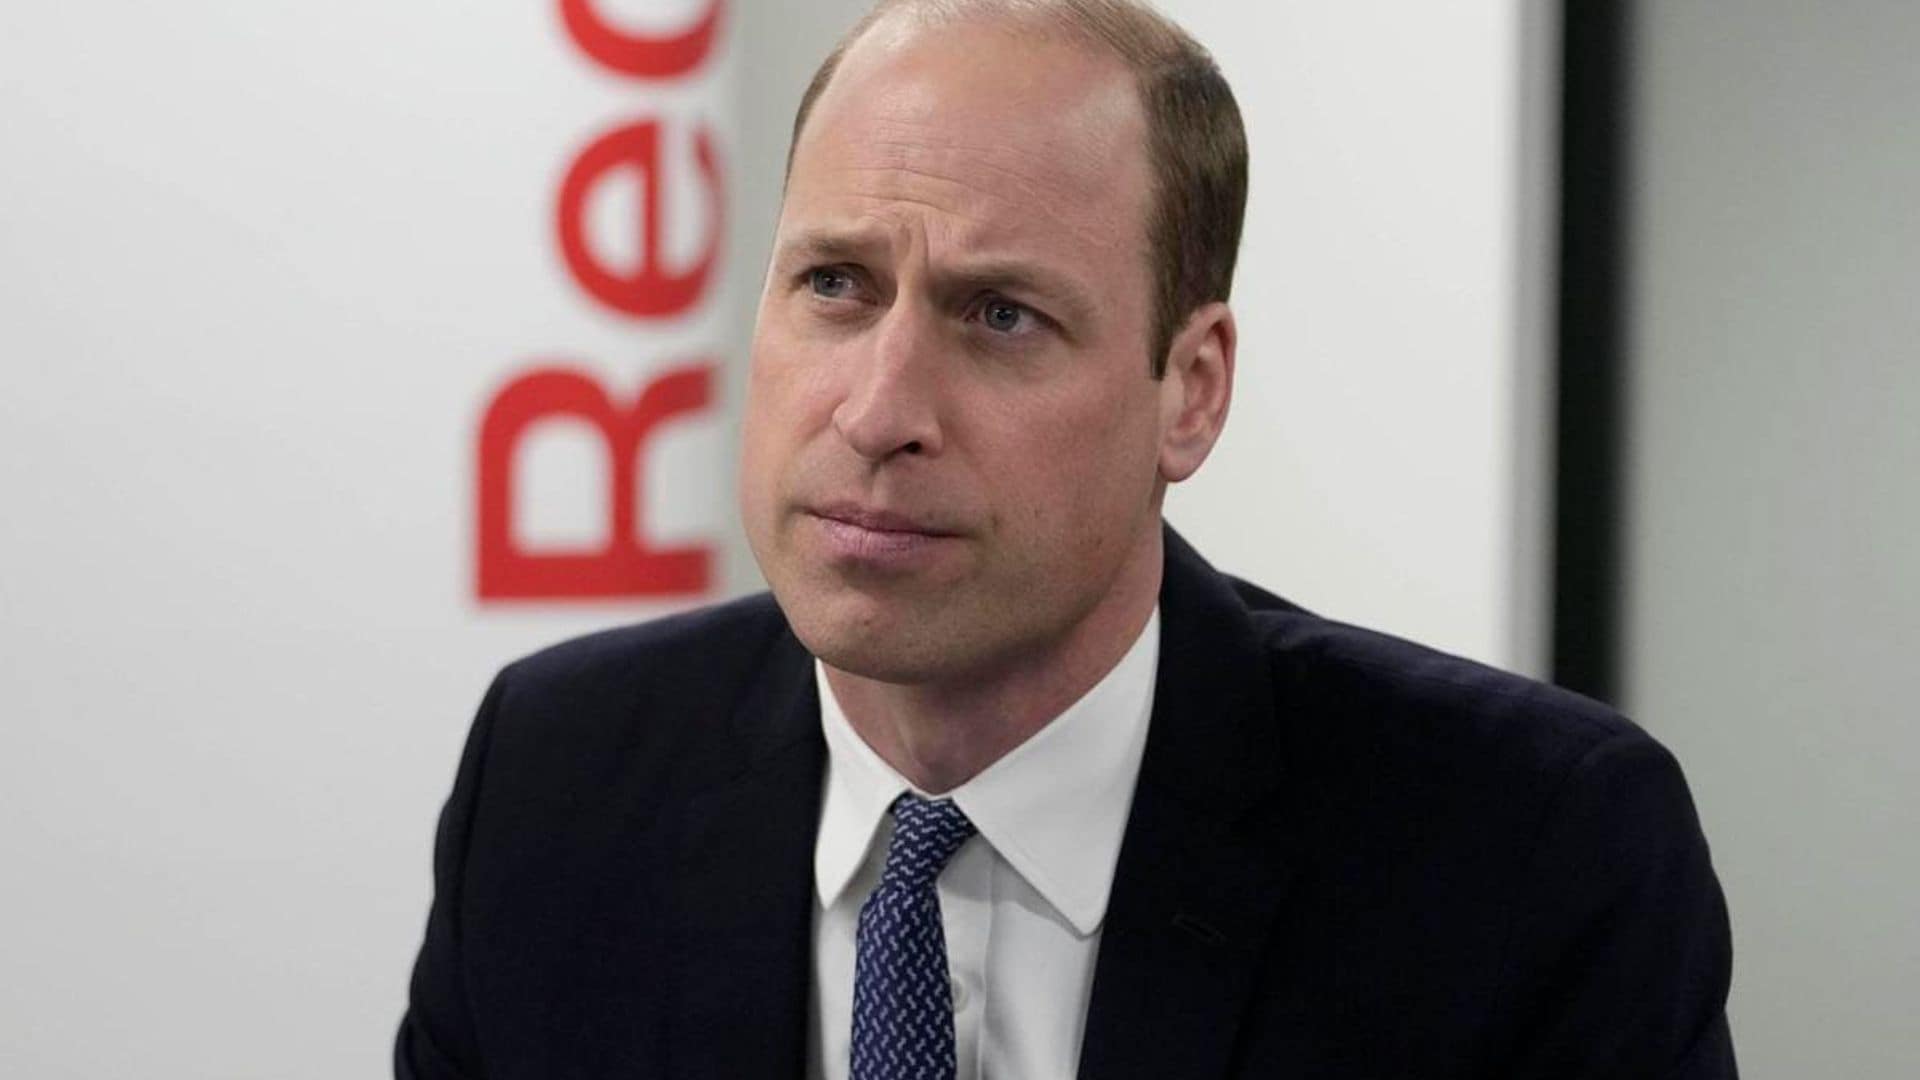 Prince William misses godfather’s memorial service due to a ‘personal matter’